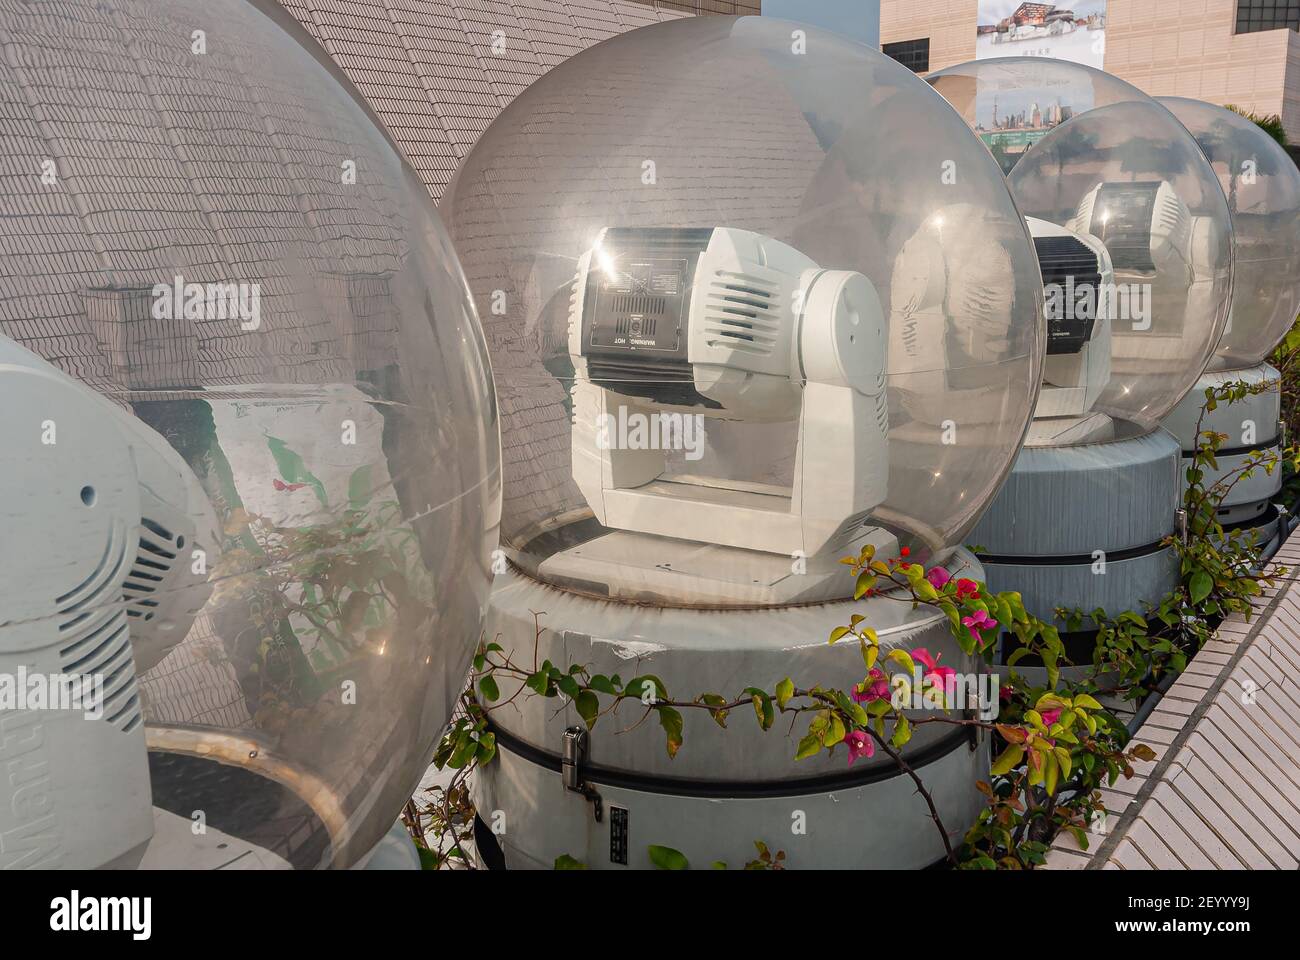 Kowloon, Hong Kong, China - May 13, 2010: Line of white robotic light canons under glass sphere to work during evening light show. Stock Photo